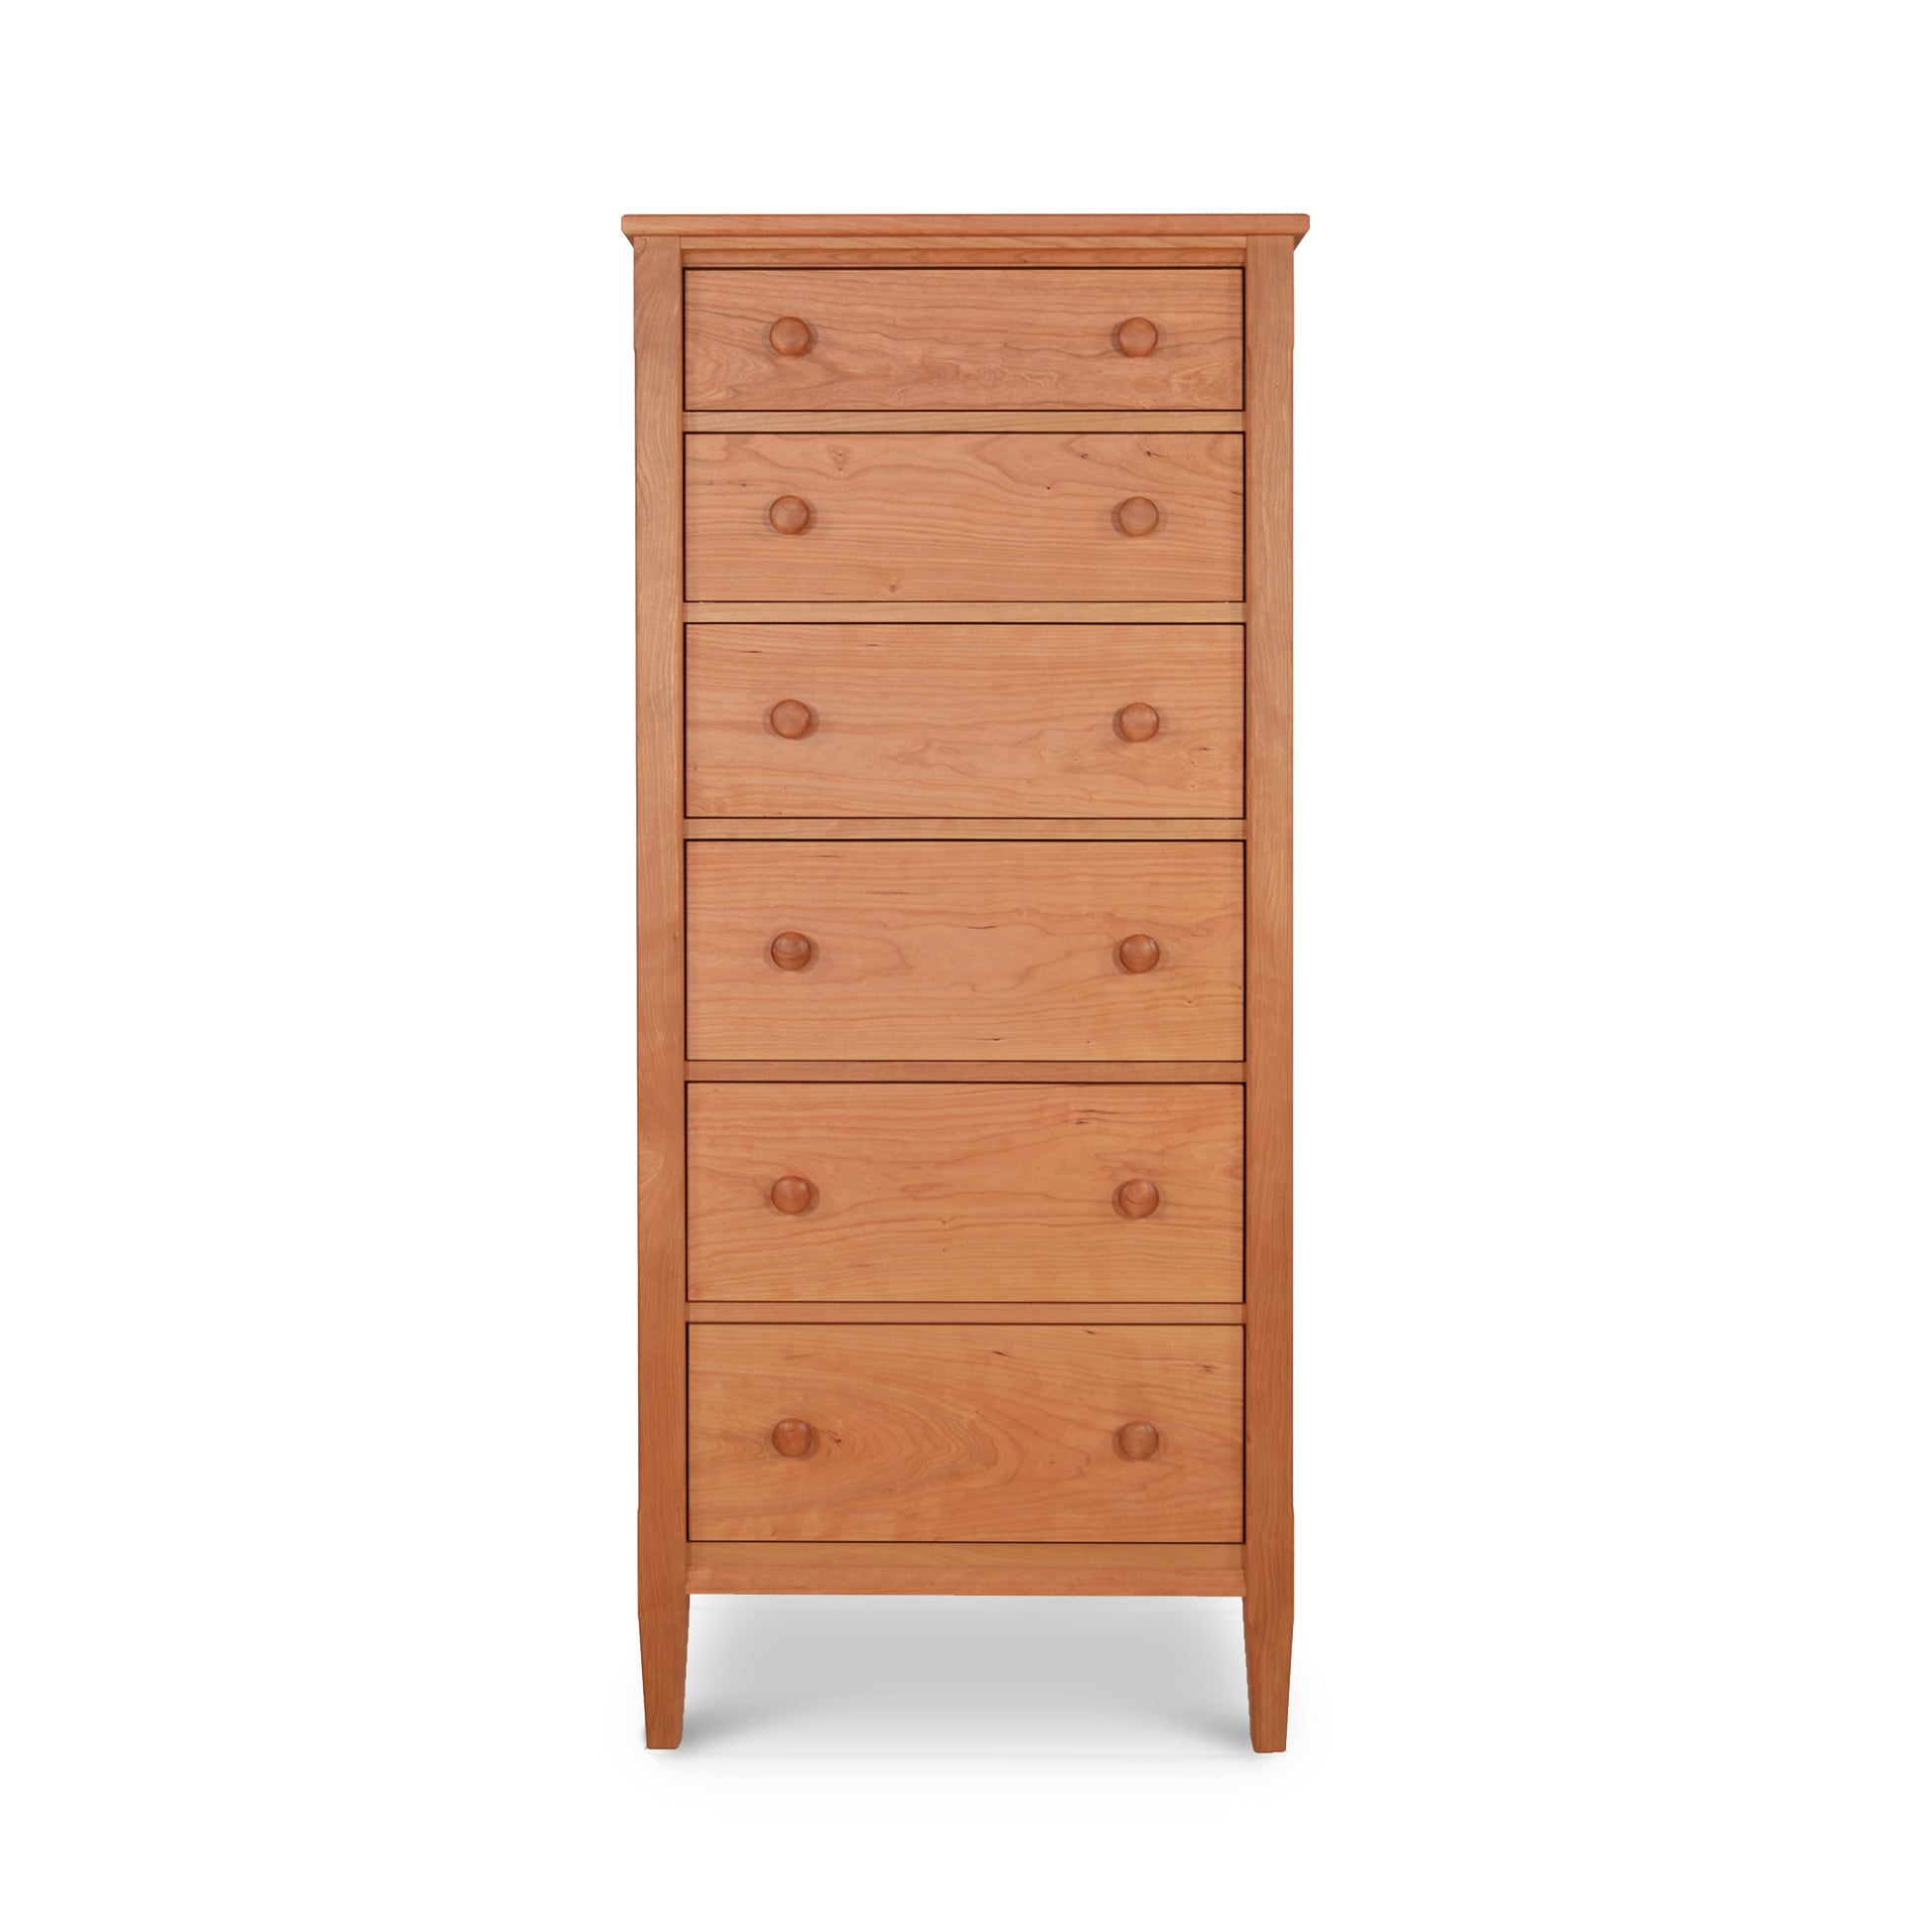 A Vermont-Made Vermont Shaker Lingerie Chest from Maple Corner Woodworks, part of the Vermont Shaker Furniture Collection, on a white background.